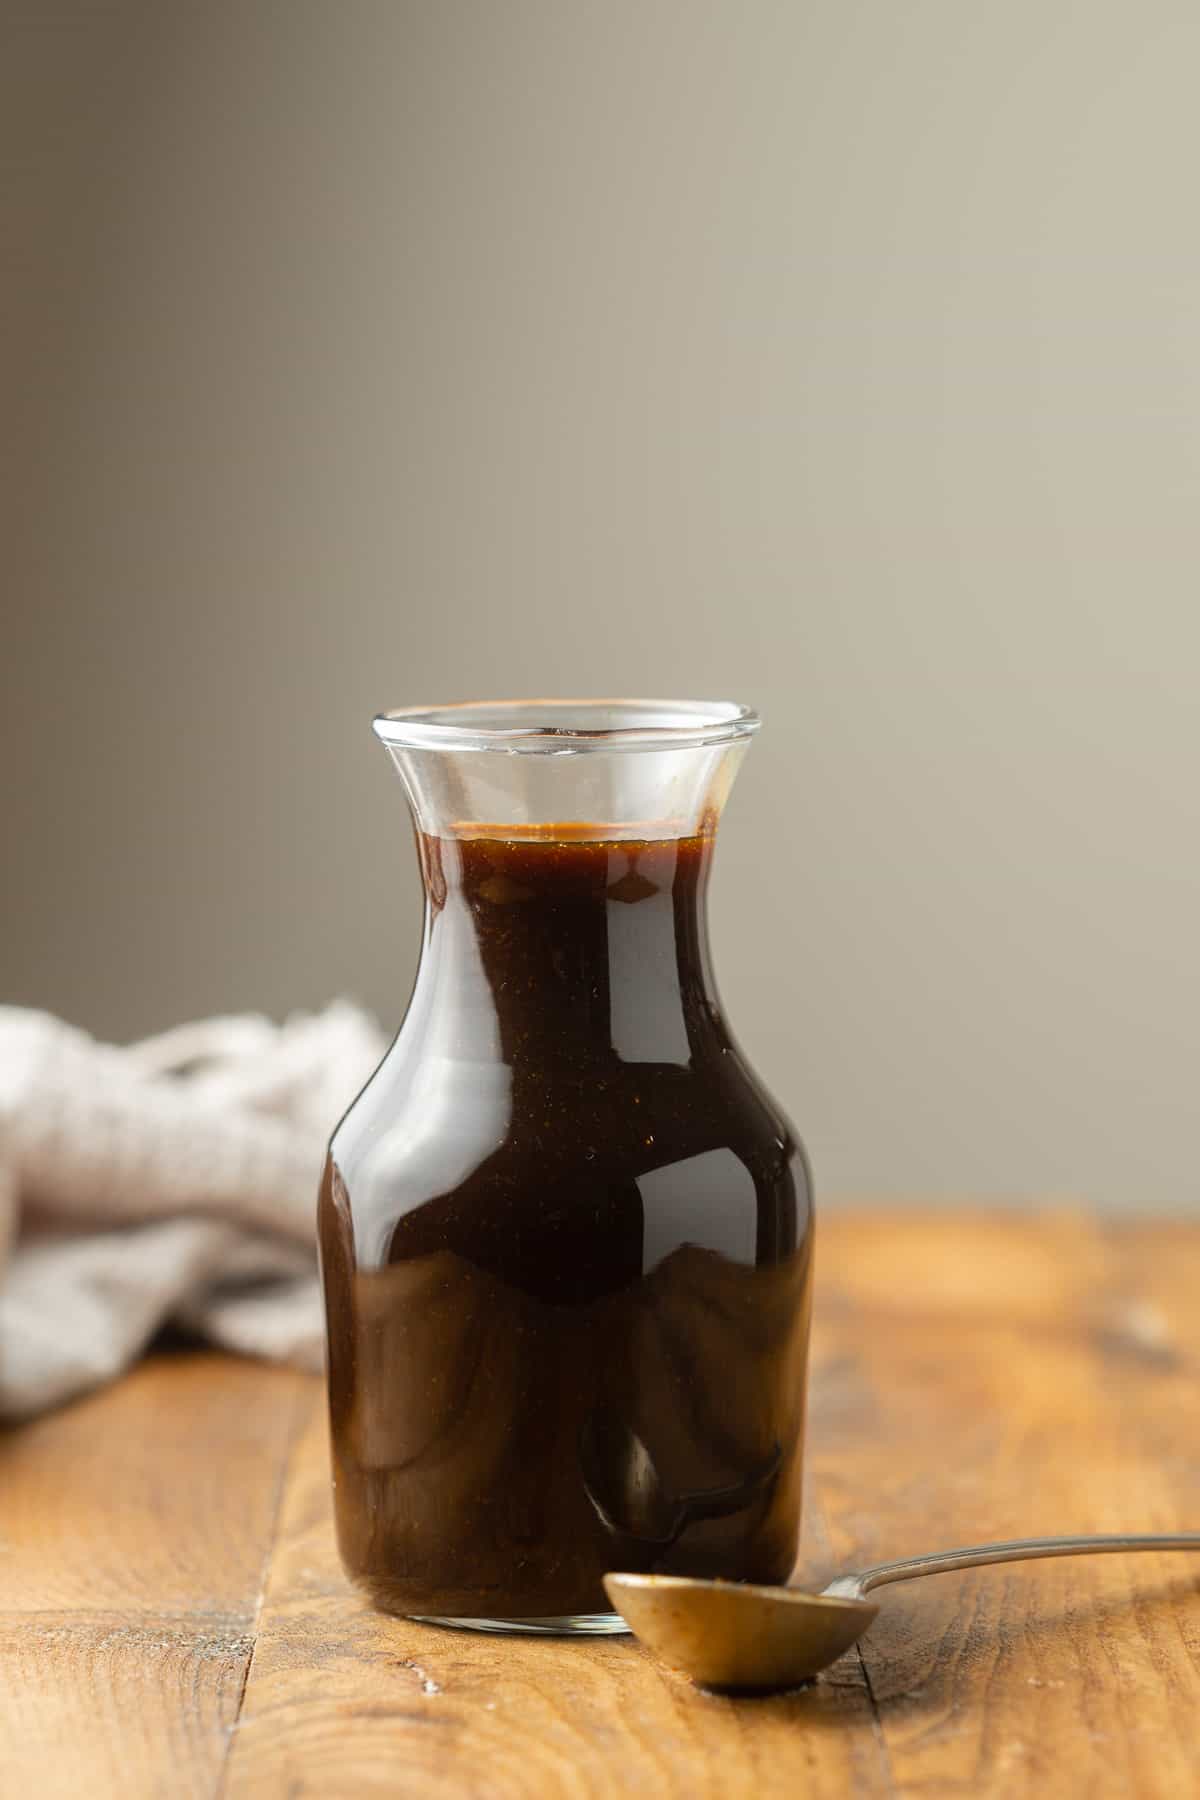 Bottle of Vegan Worcestershire Sauce with spoon in the foreground.